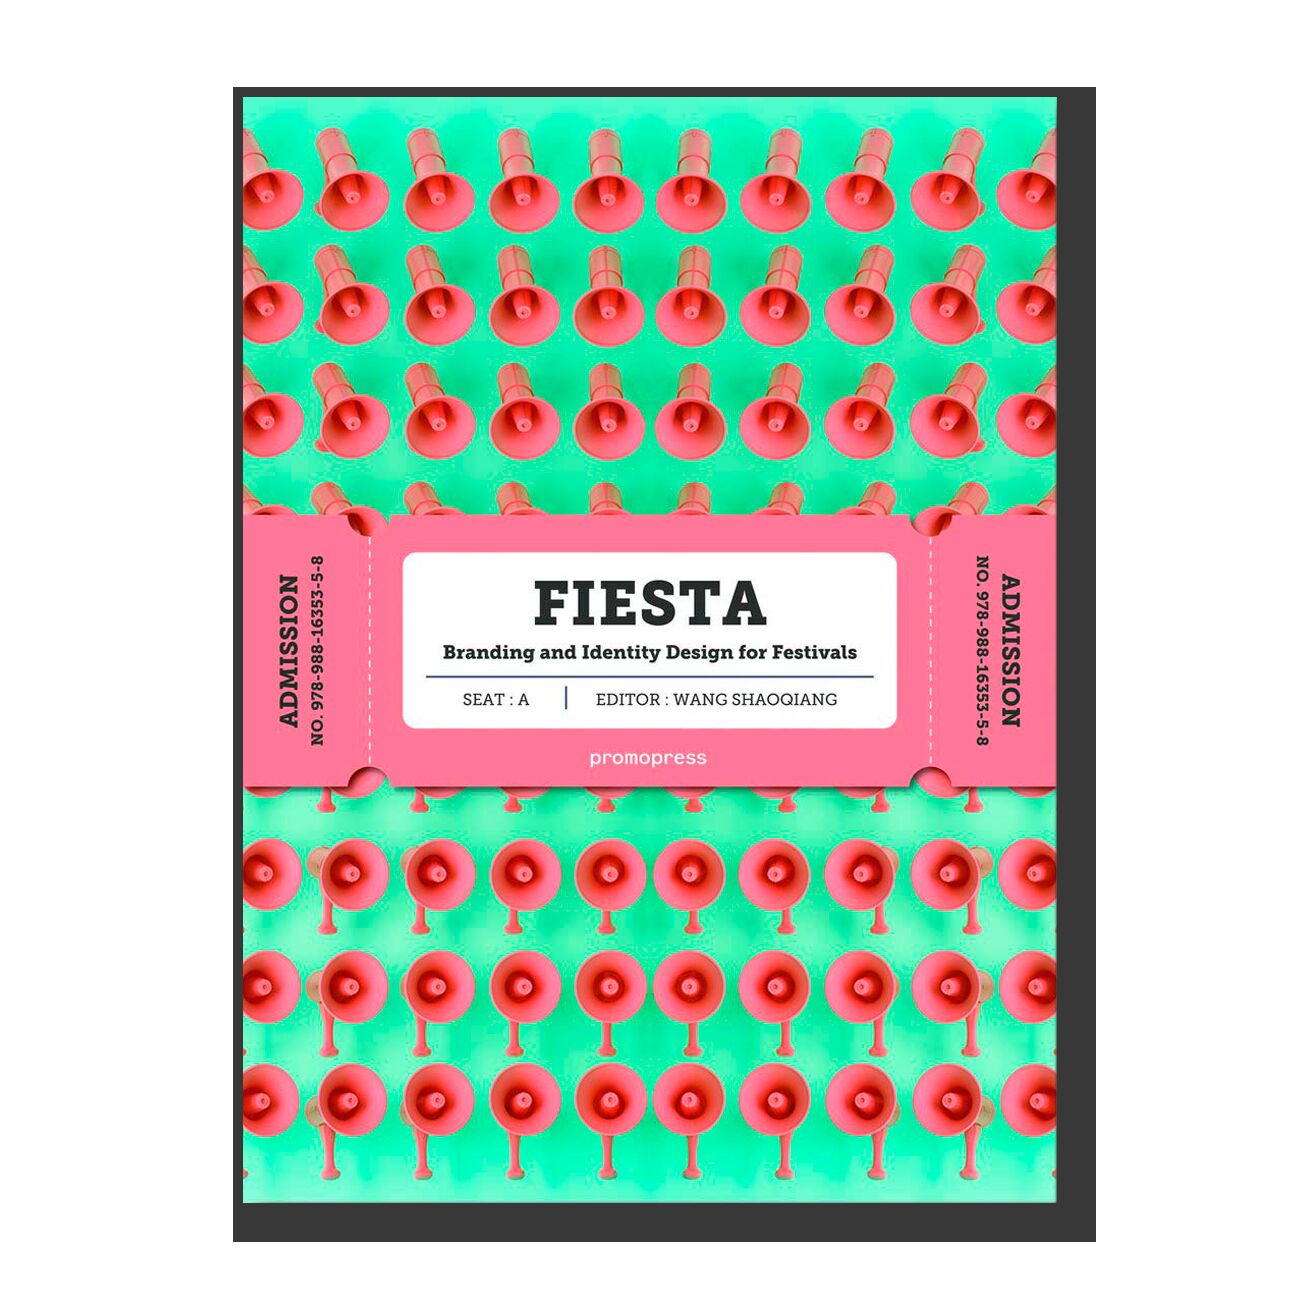 Fiesta: The Branding and Identity for Festivals